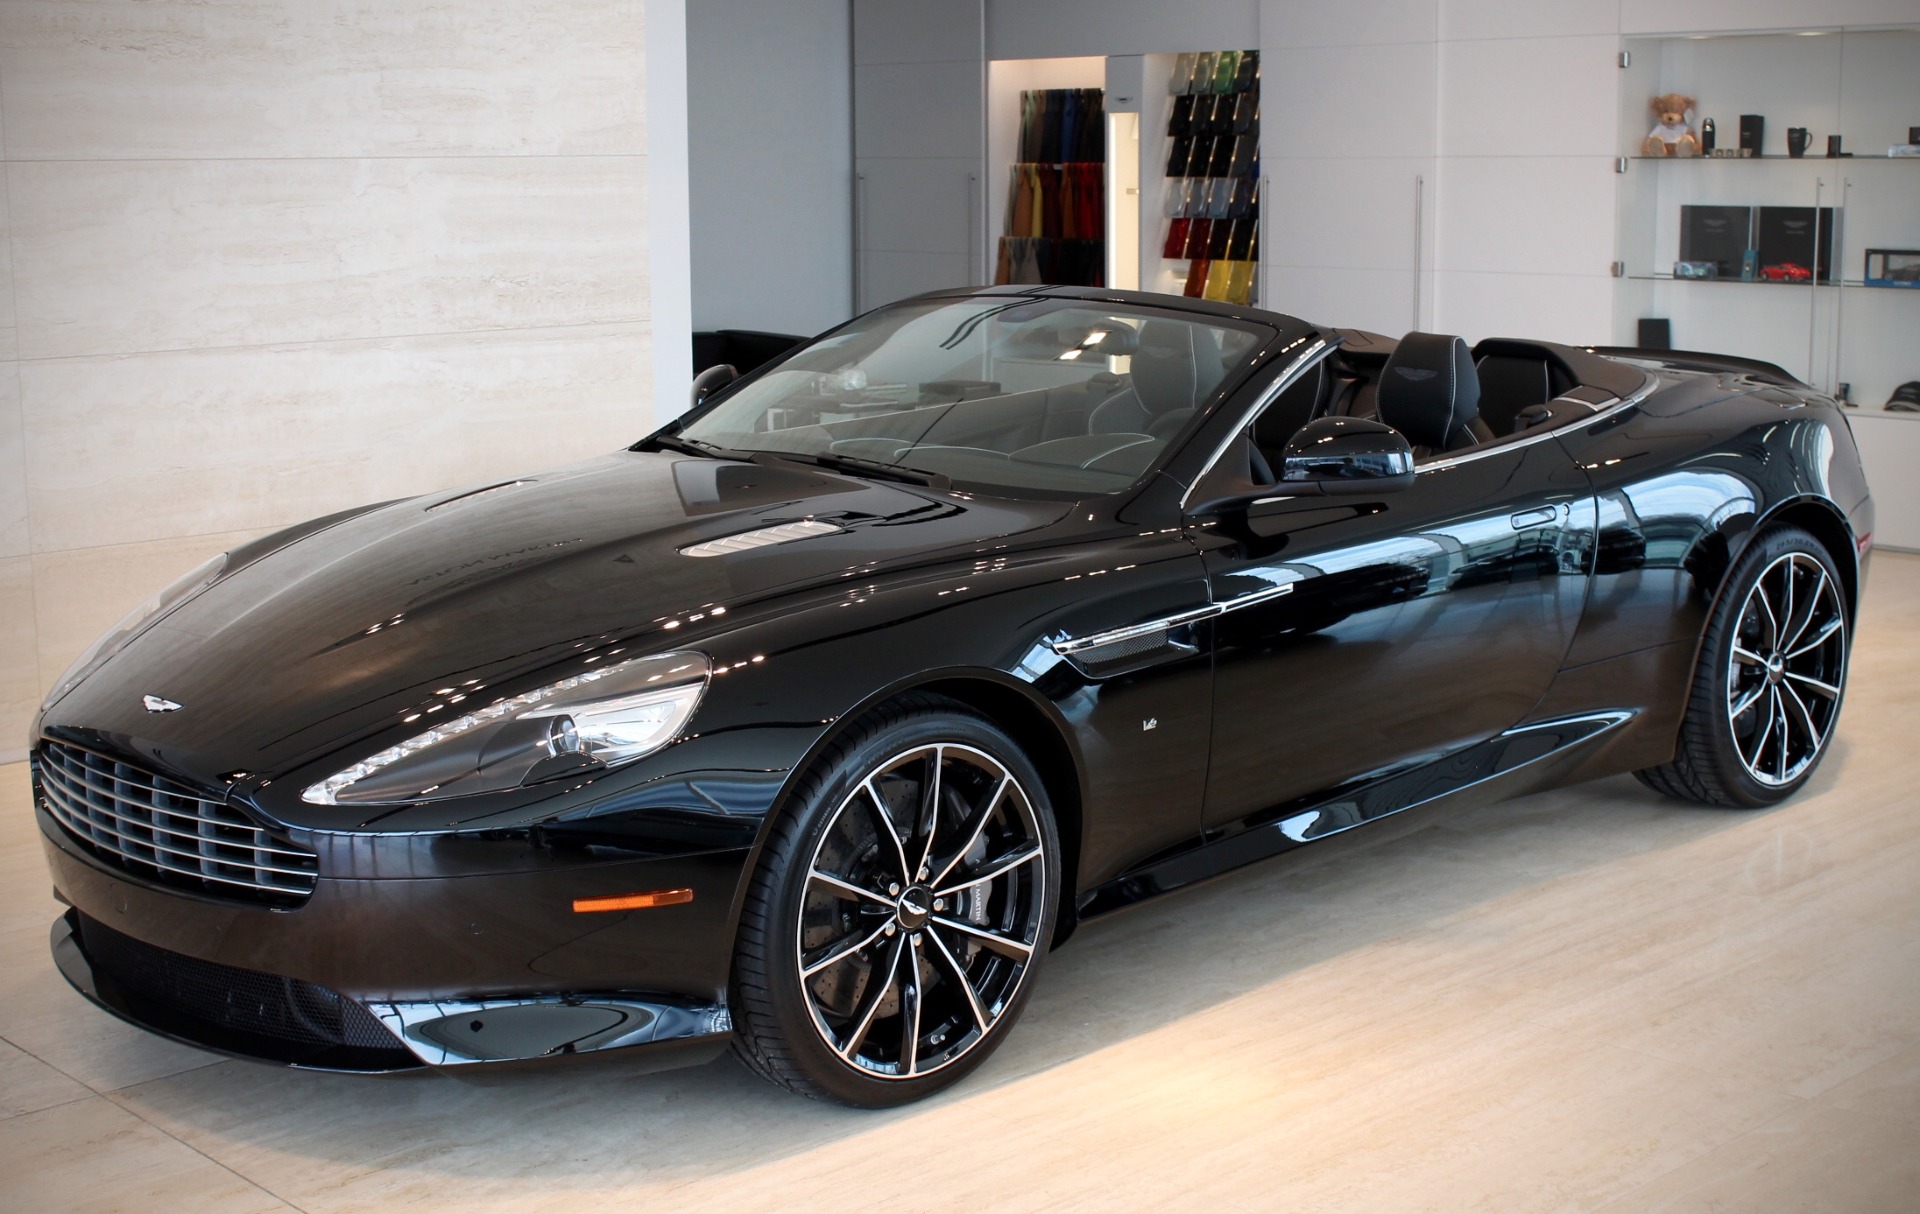 Amazing Aston Martin DB9 Pictures & Backgrounds